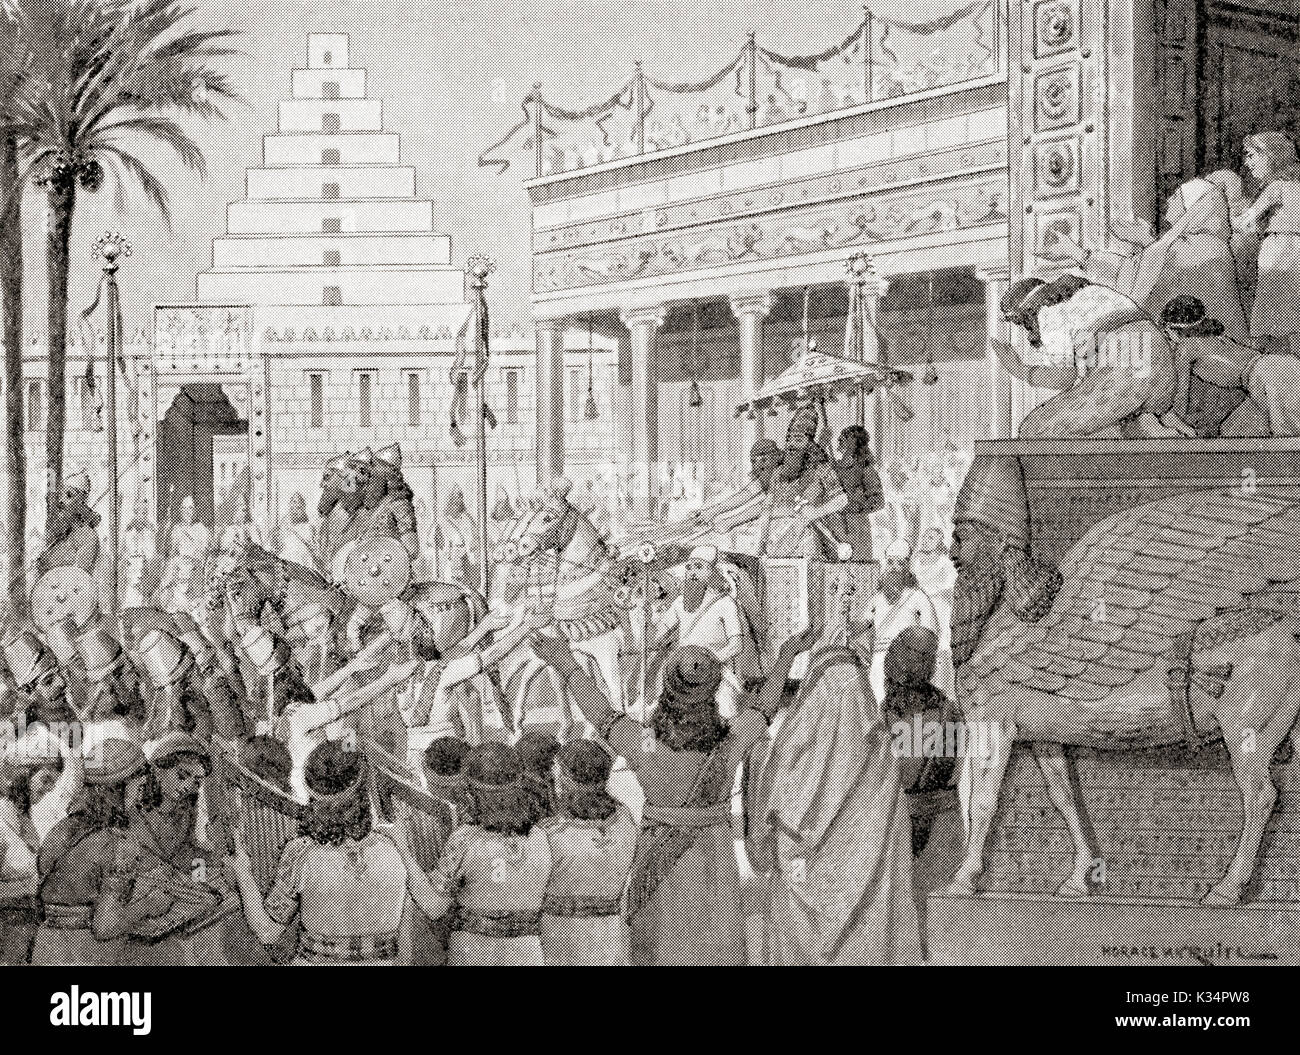 Sargon II, proclaimed king of Assyria, 722 BC.  From Hutchinson's History of the Nations, published 1915. Stock Photo